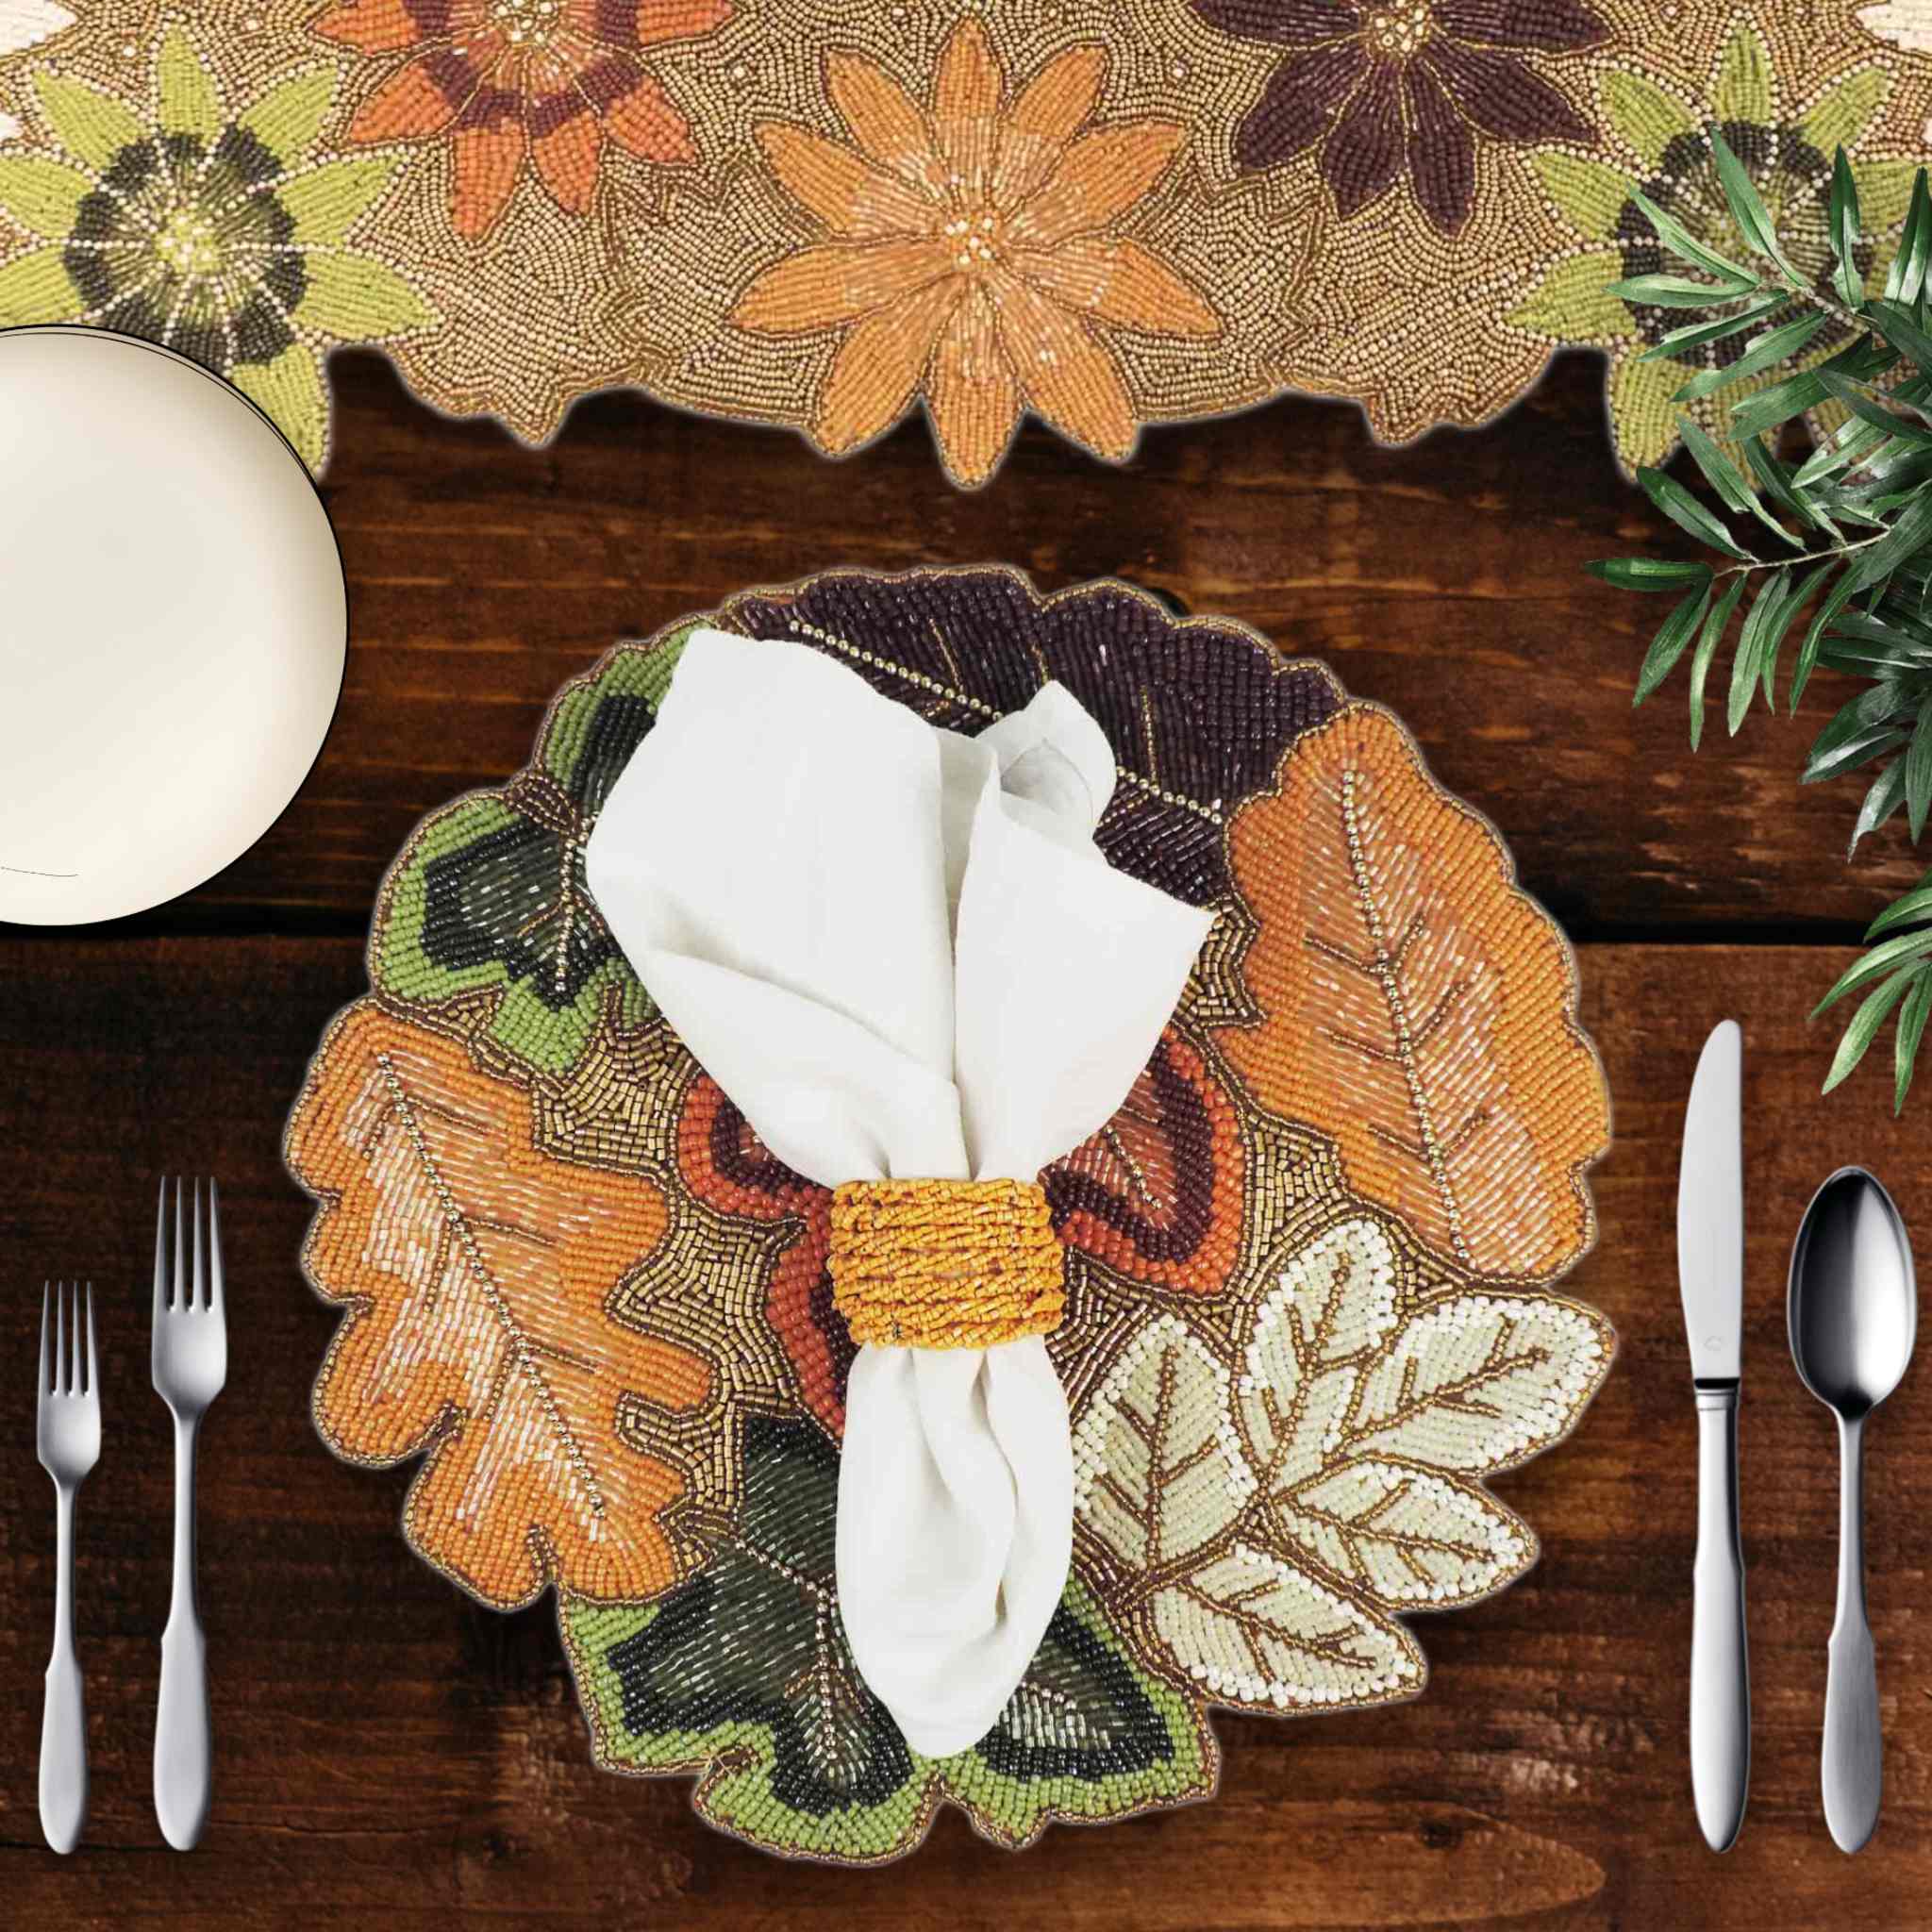 Autumn Glass Bead Embroidered Table Runner in Multi